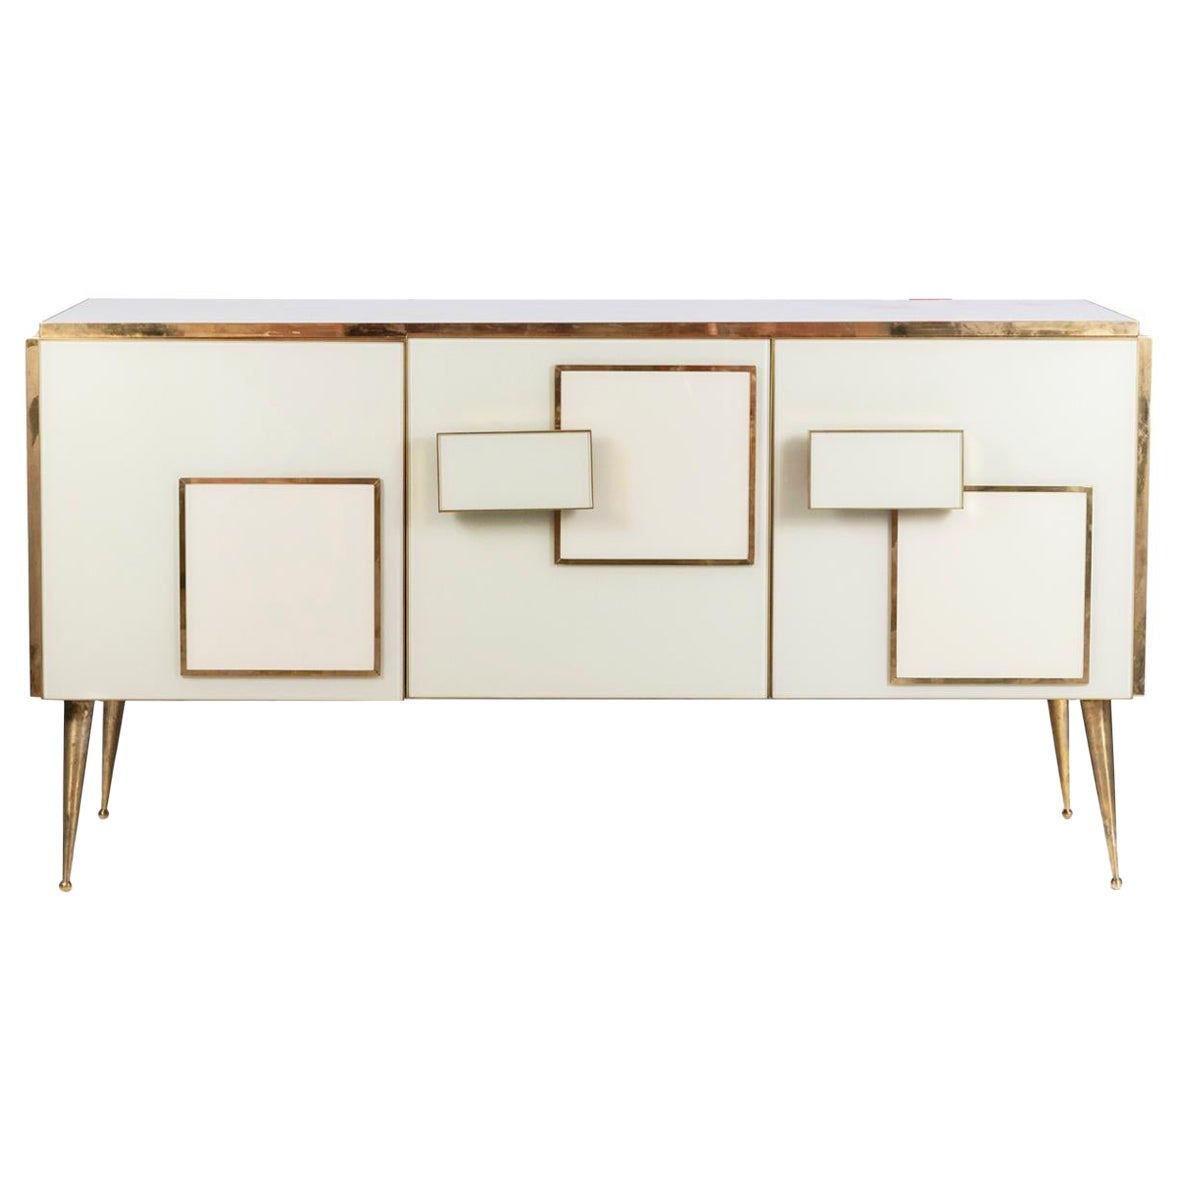 Geometric sideboard in glass and gilded brass. Contemporary Italian work. For Sale